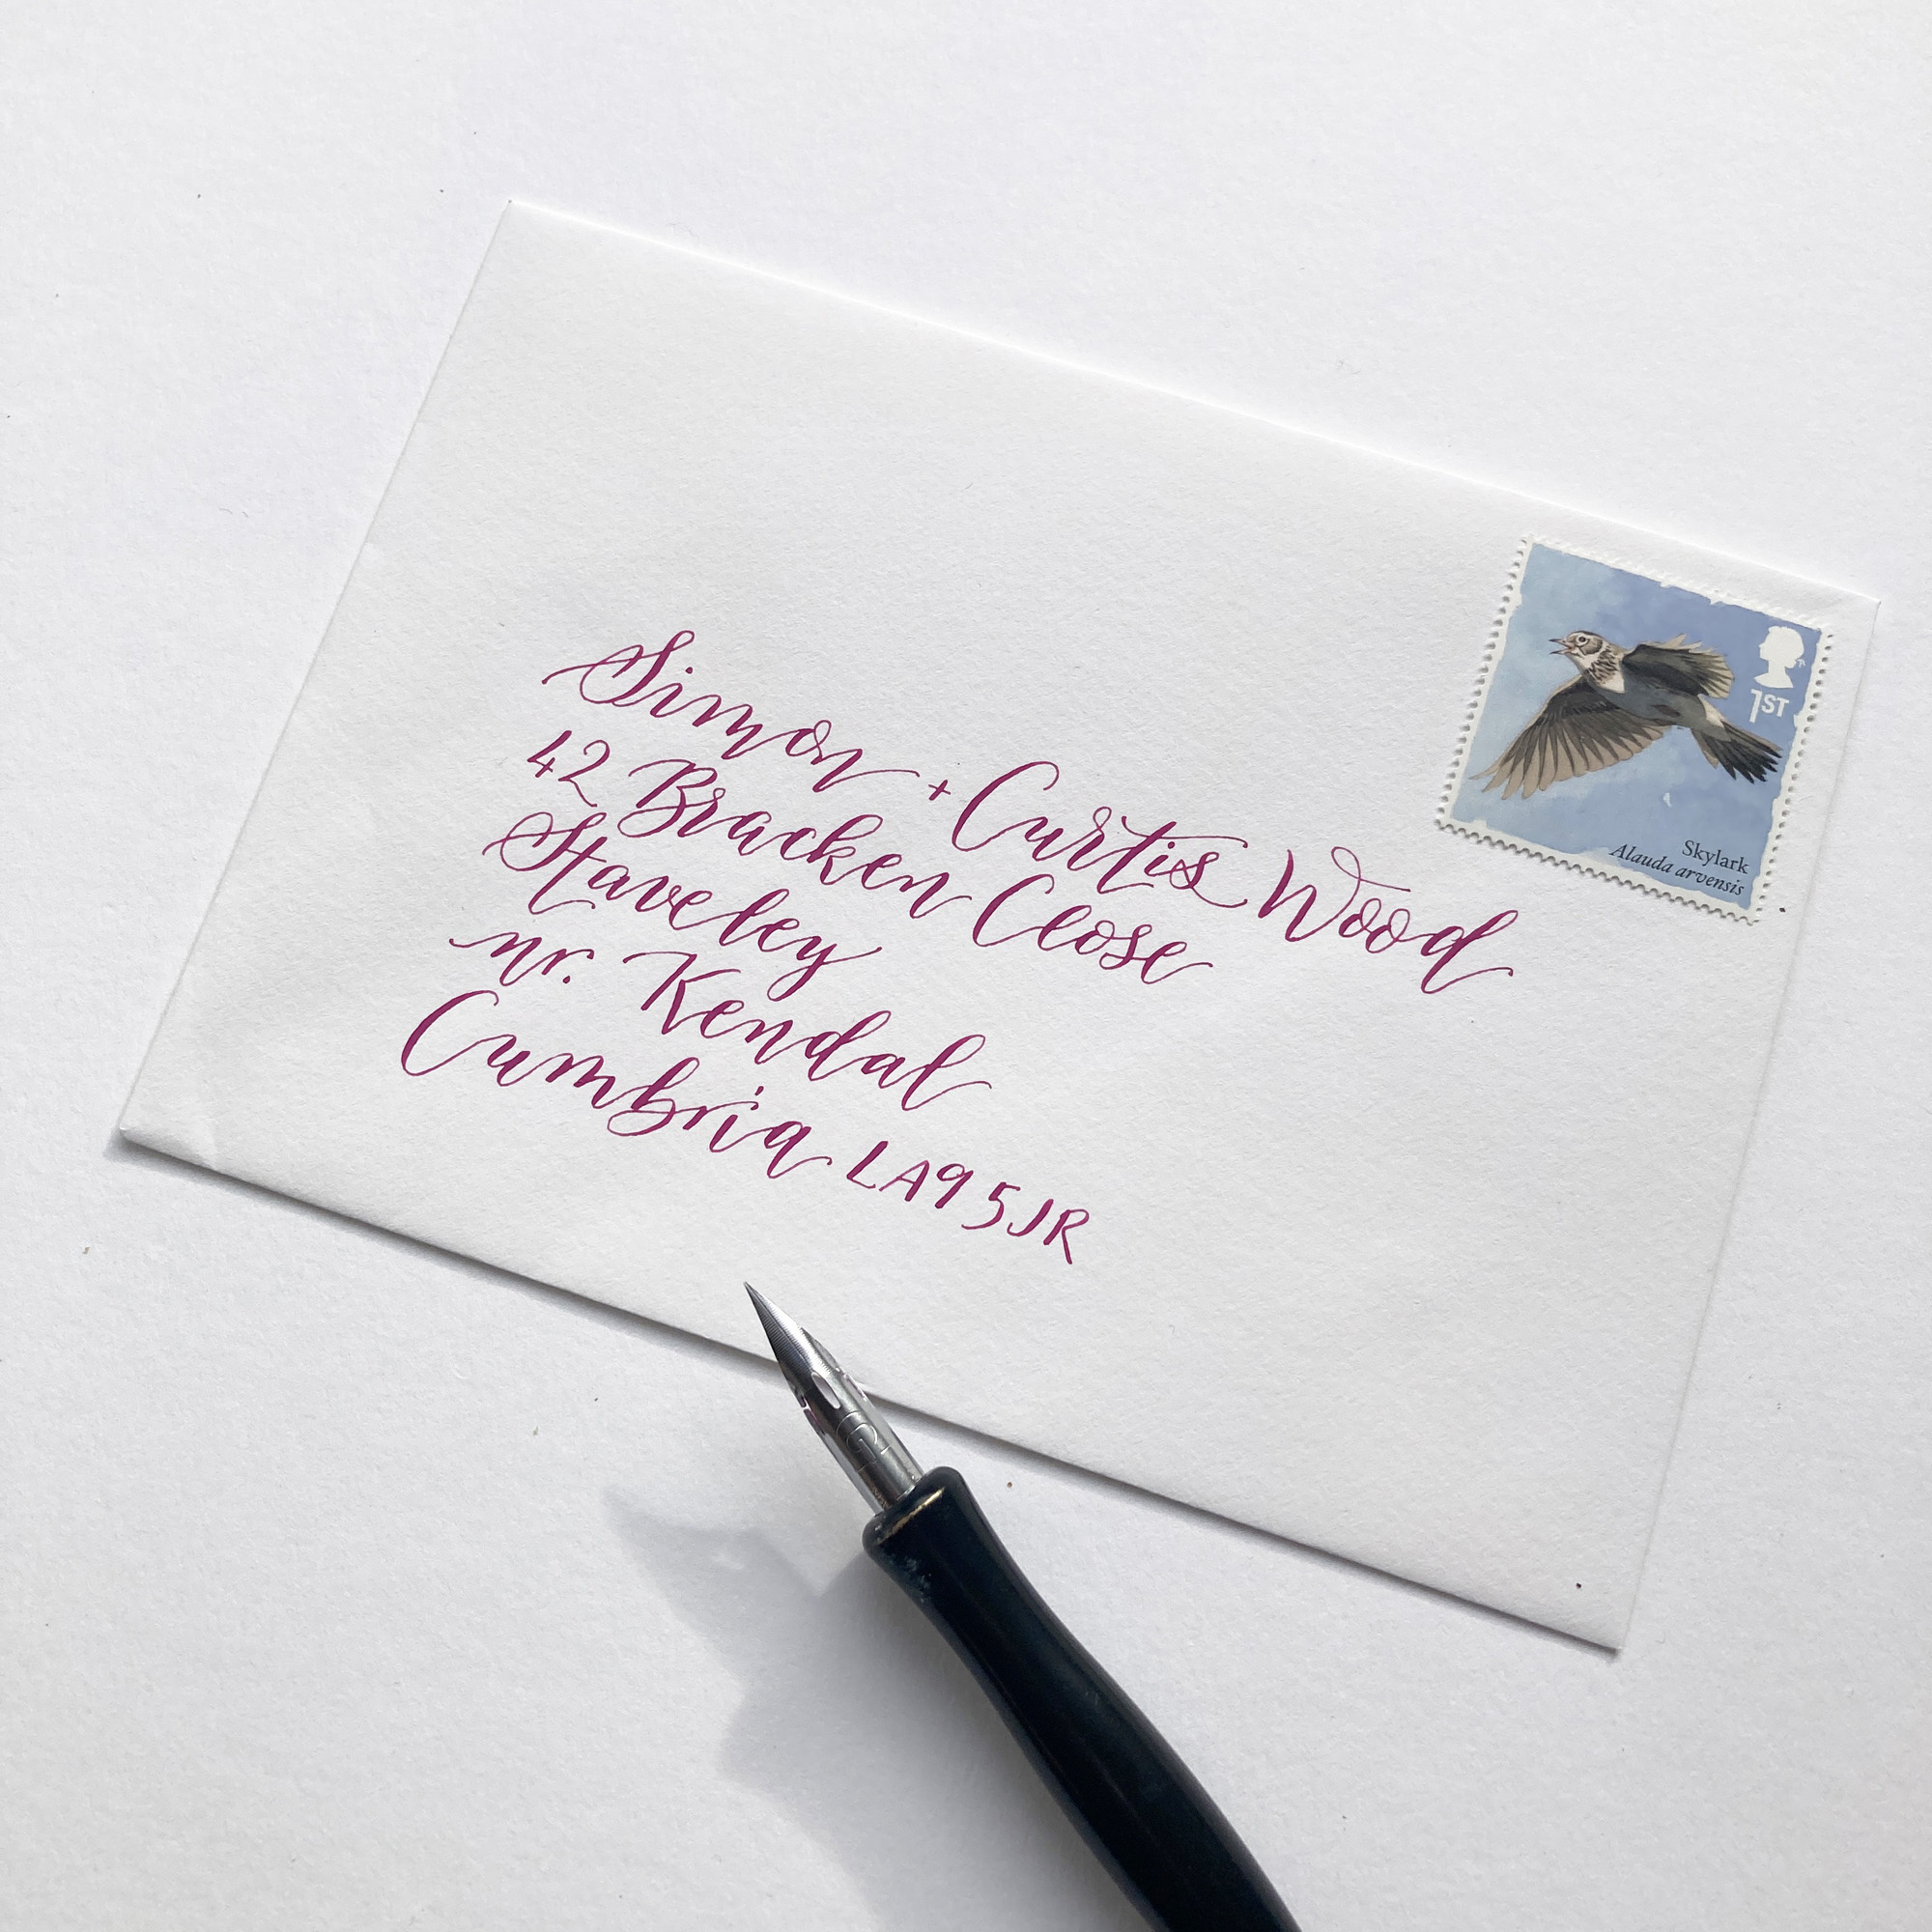 Playful calligraphy style on an envelope in vibrant pink ink